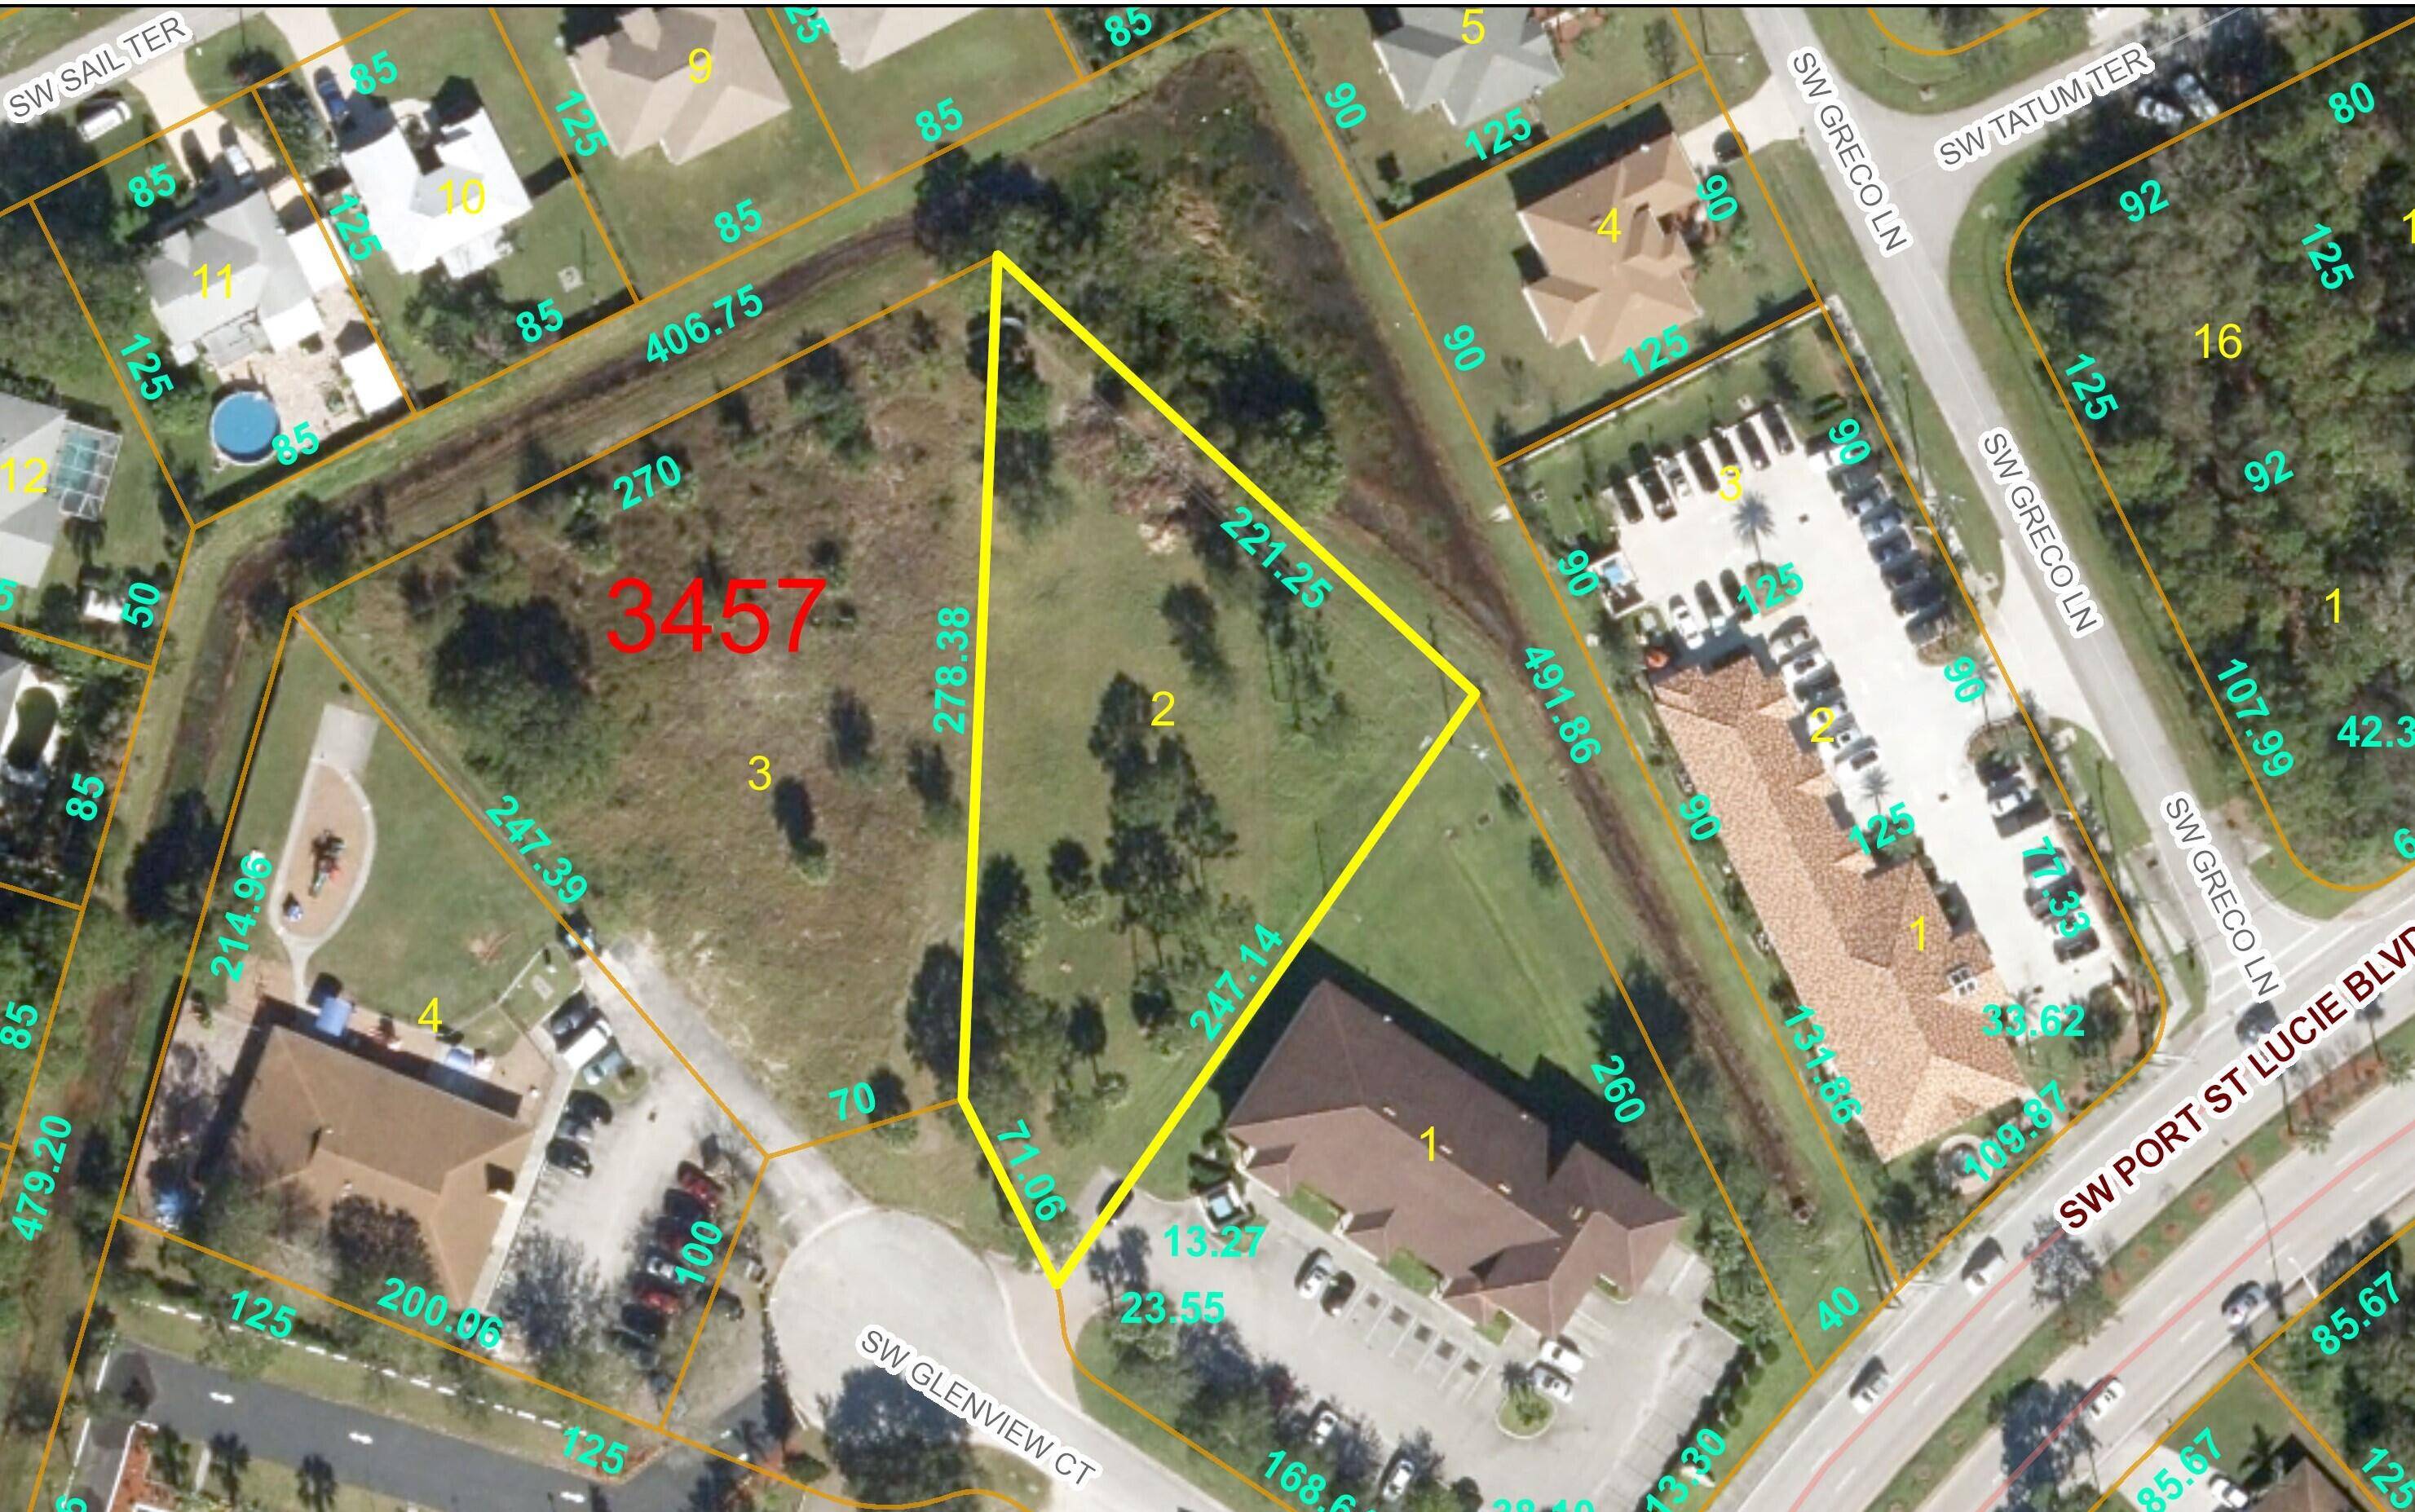 Here's a unique opportunity to purchase a large cleared commercial lot in a high growth are.